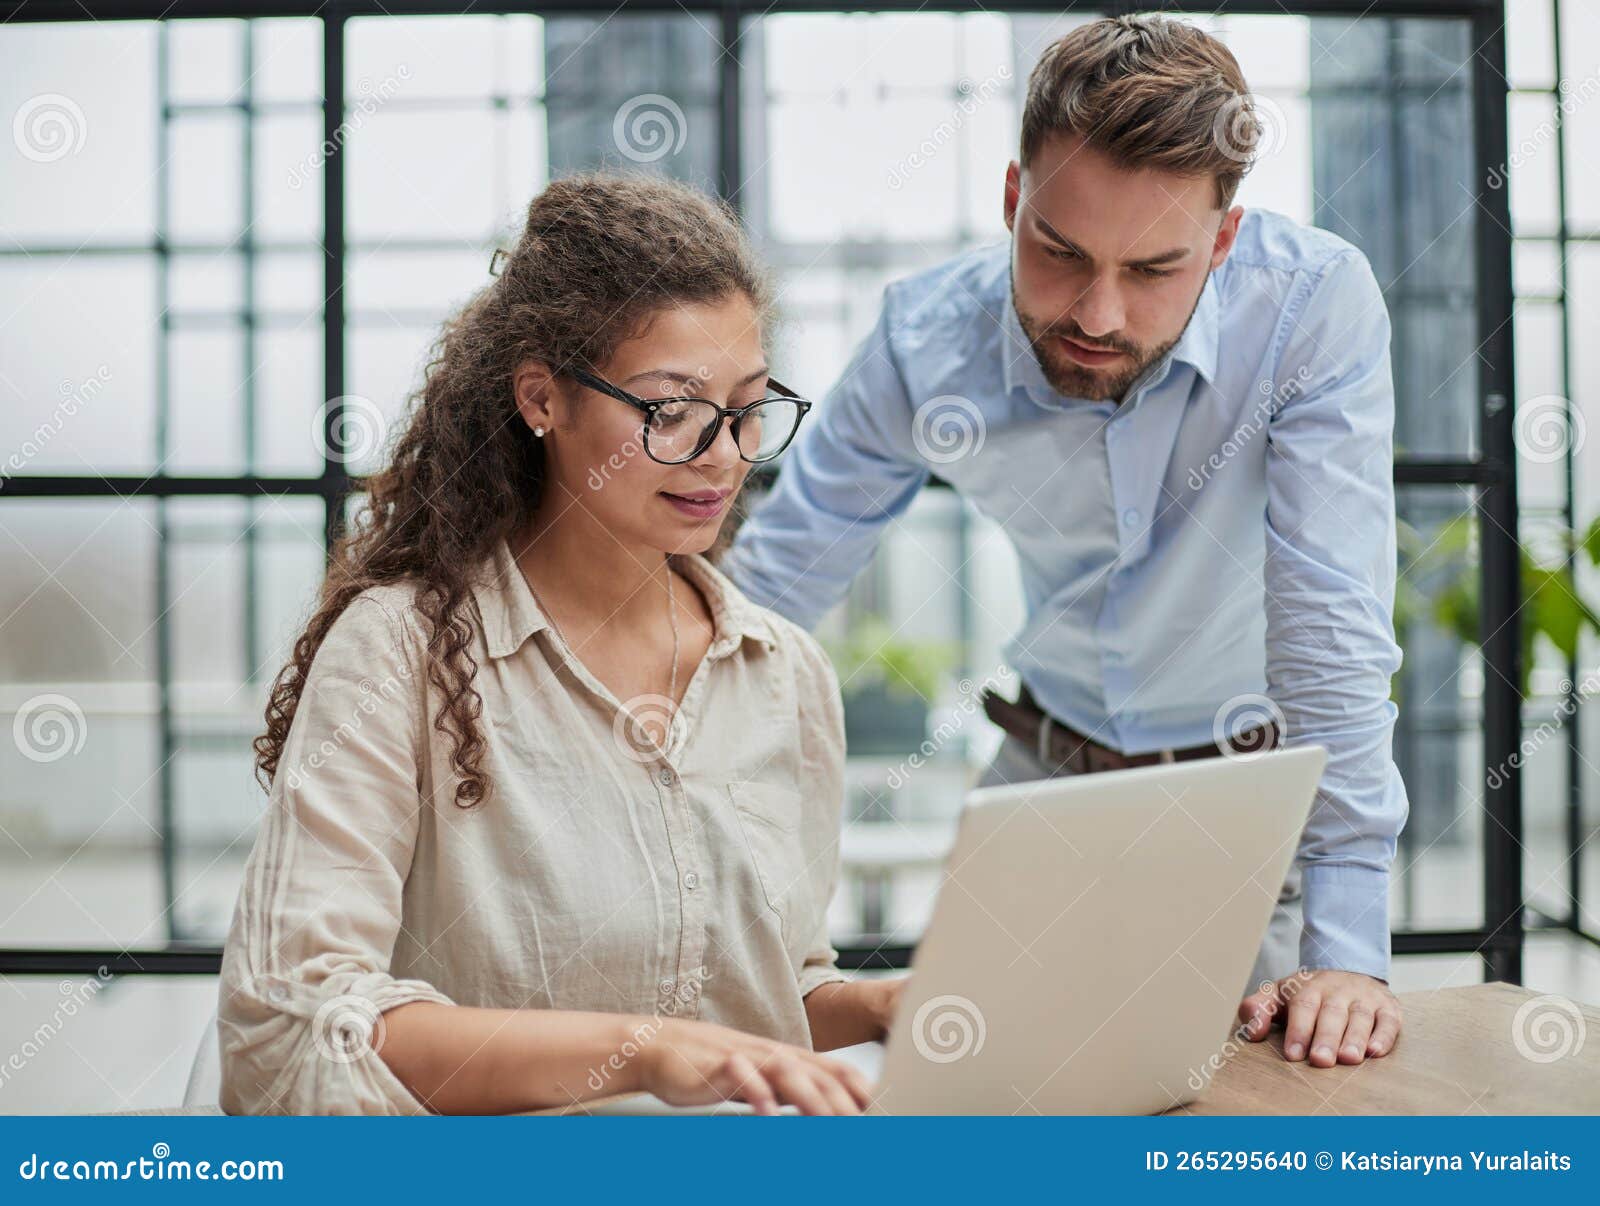 business lady looking at laptop with her colleague in the office